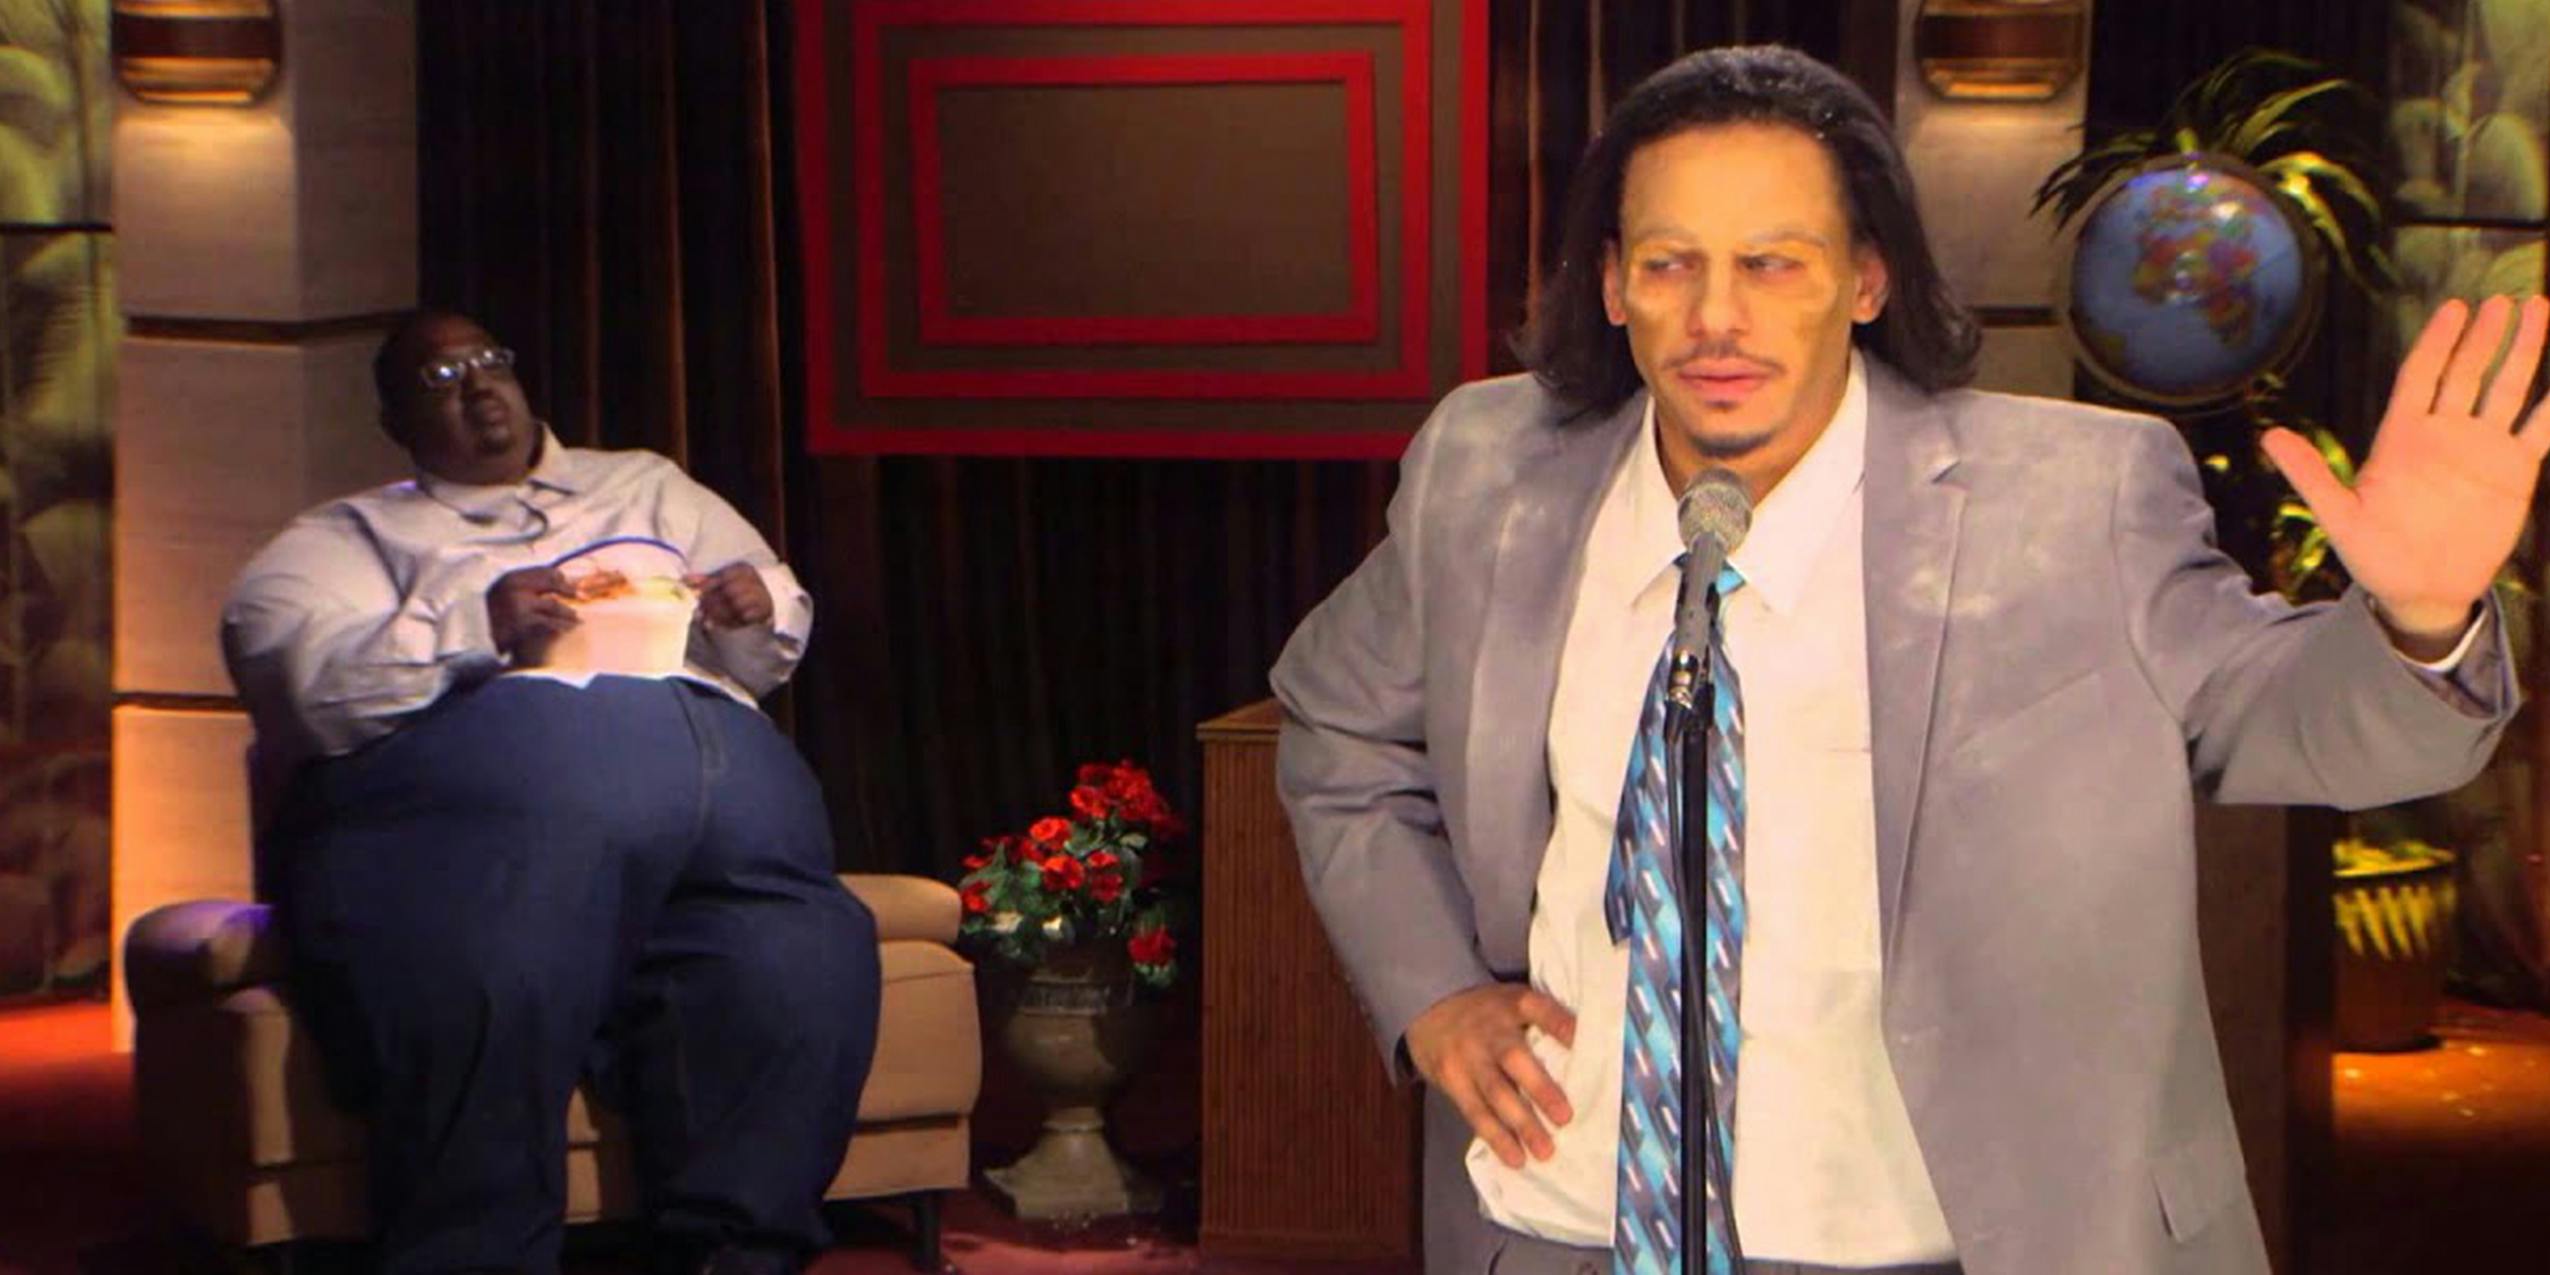 Stream 'The Eric Andre Show' How to Watch Online